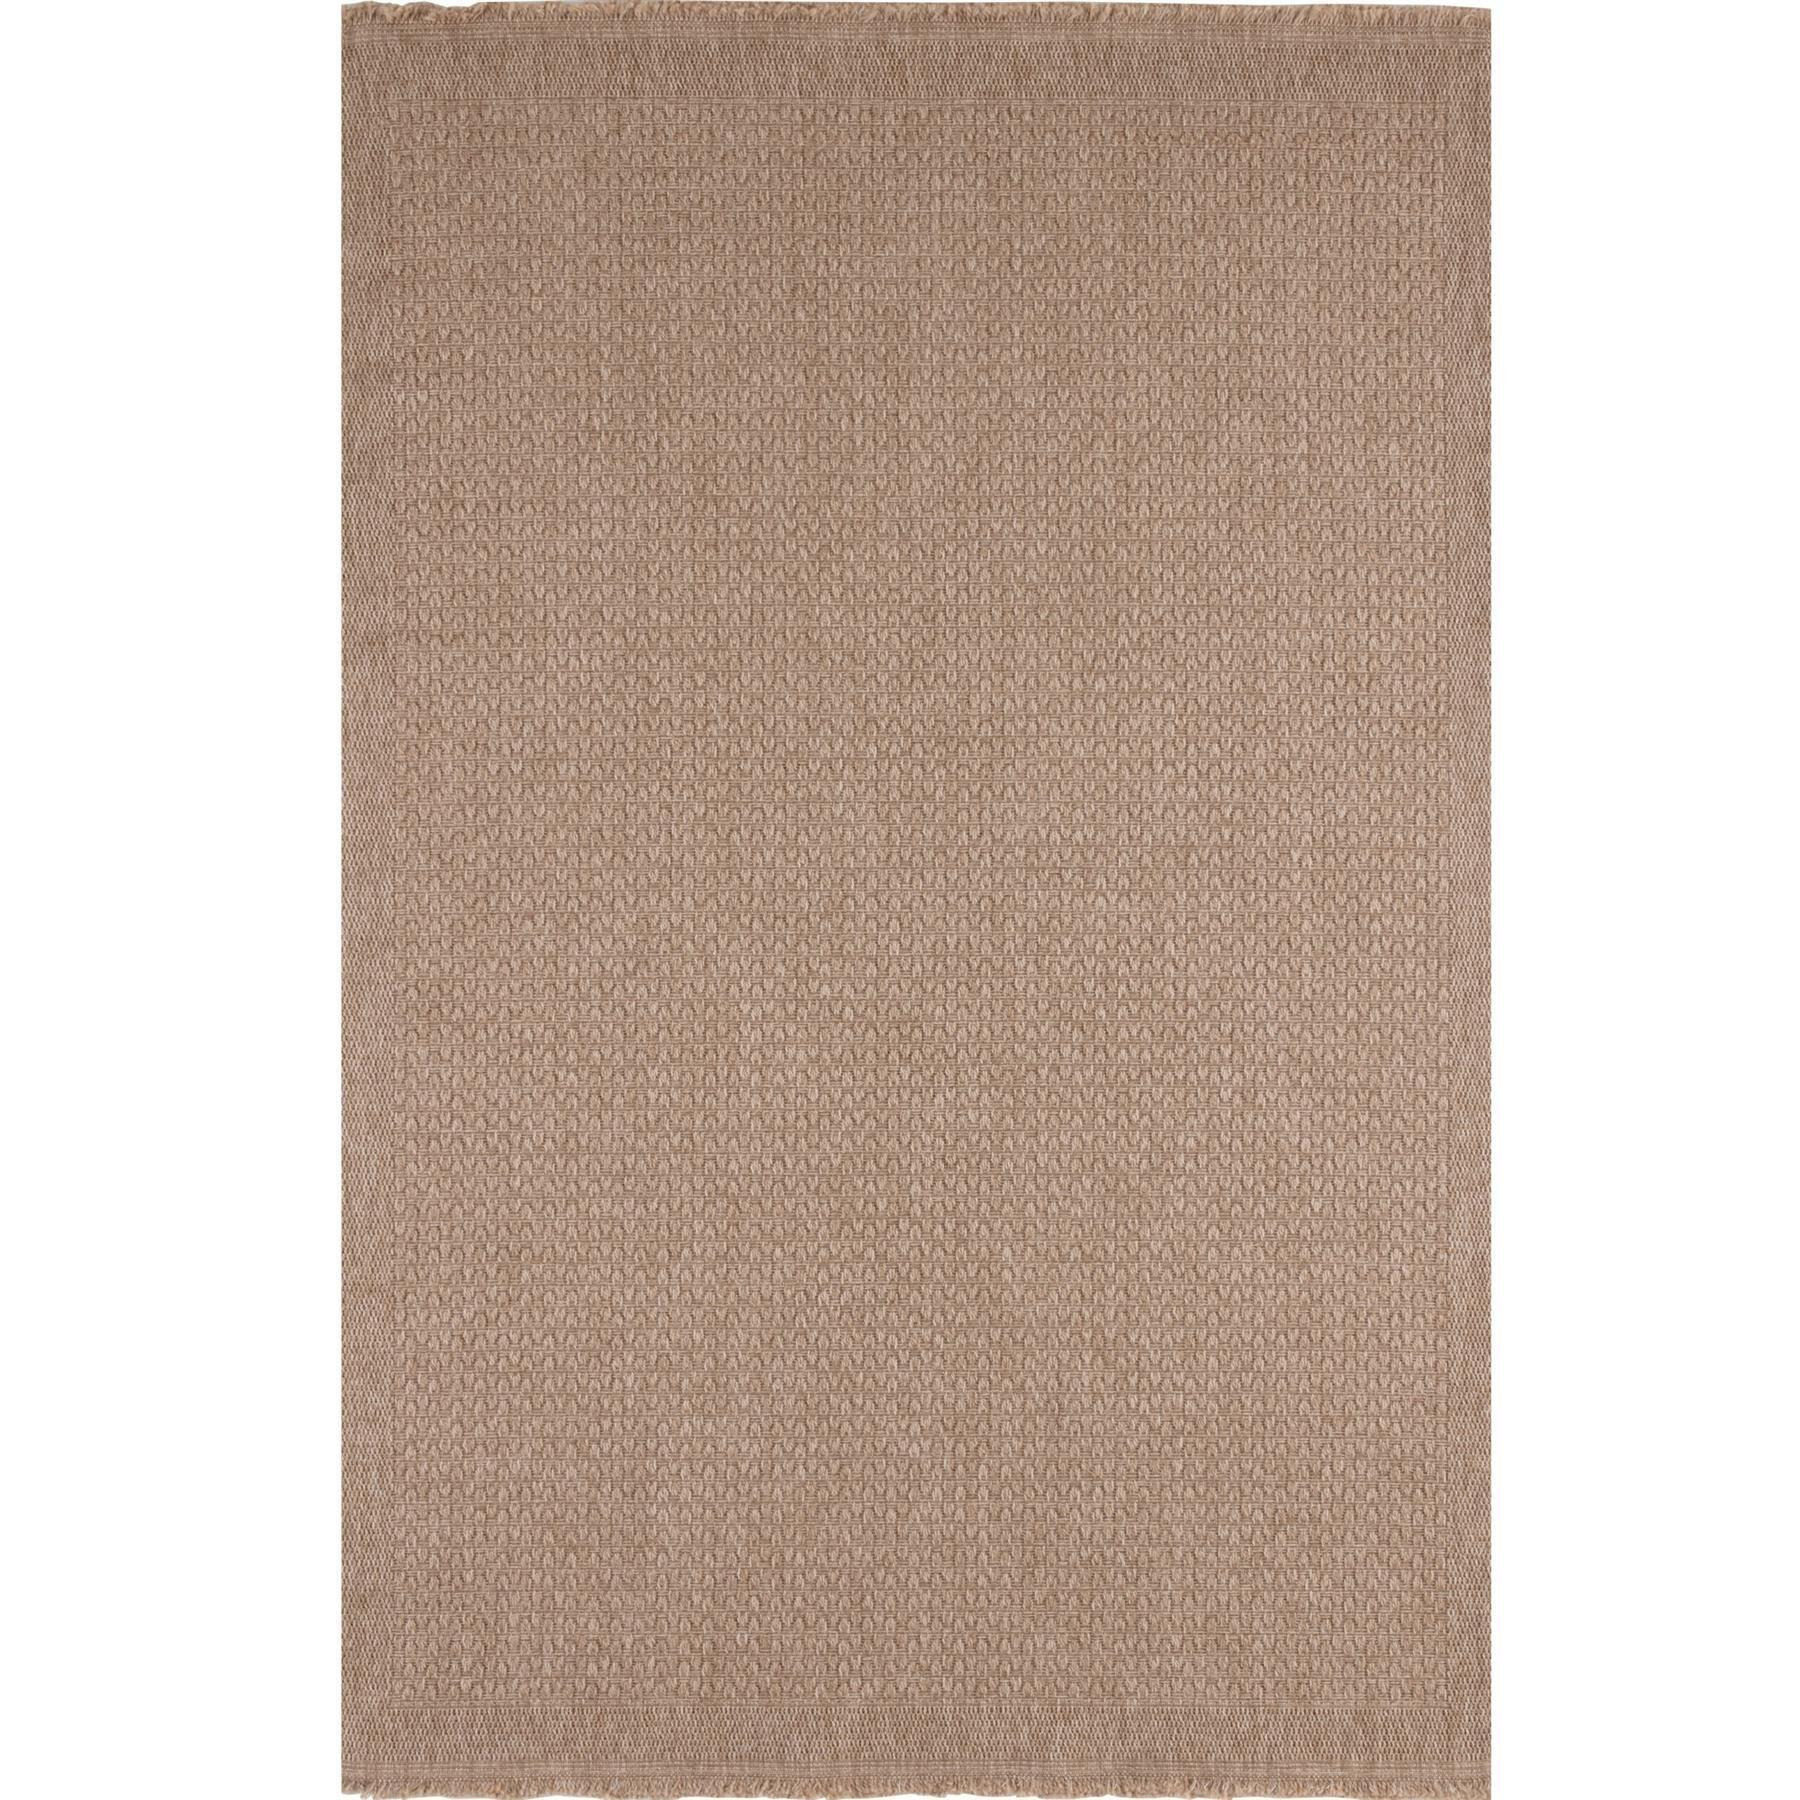 Nature Collection Outdoor Rug in Neutral - 5000N - image 1